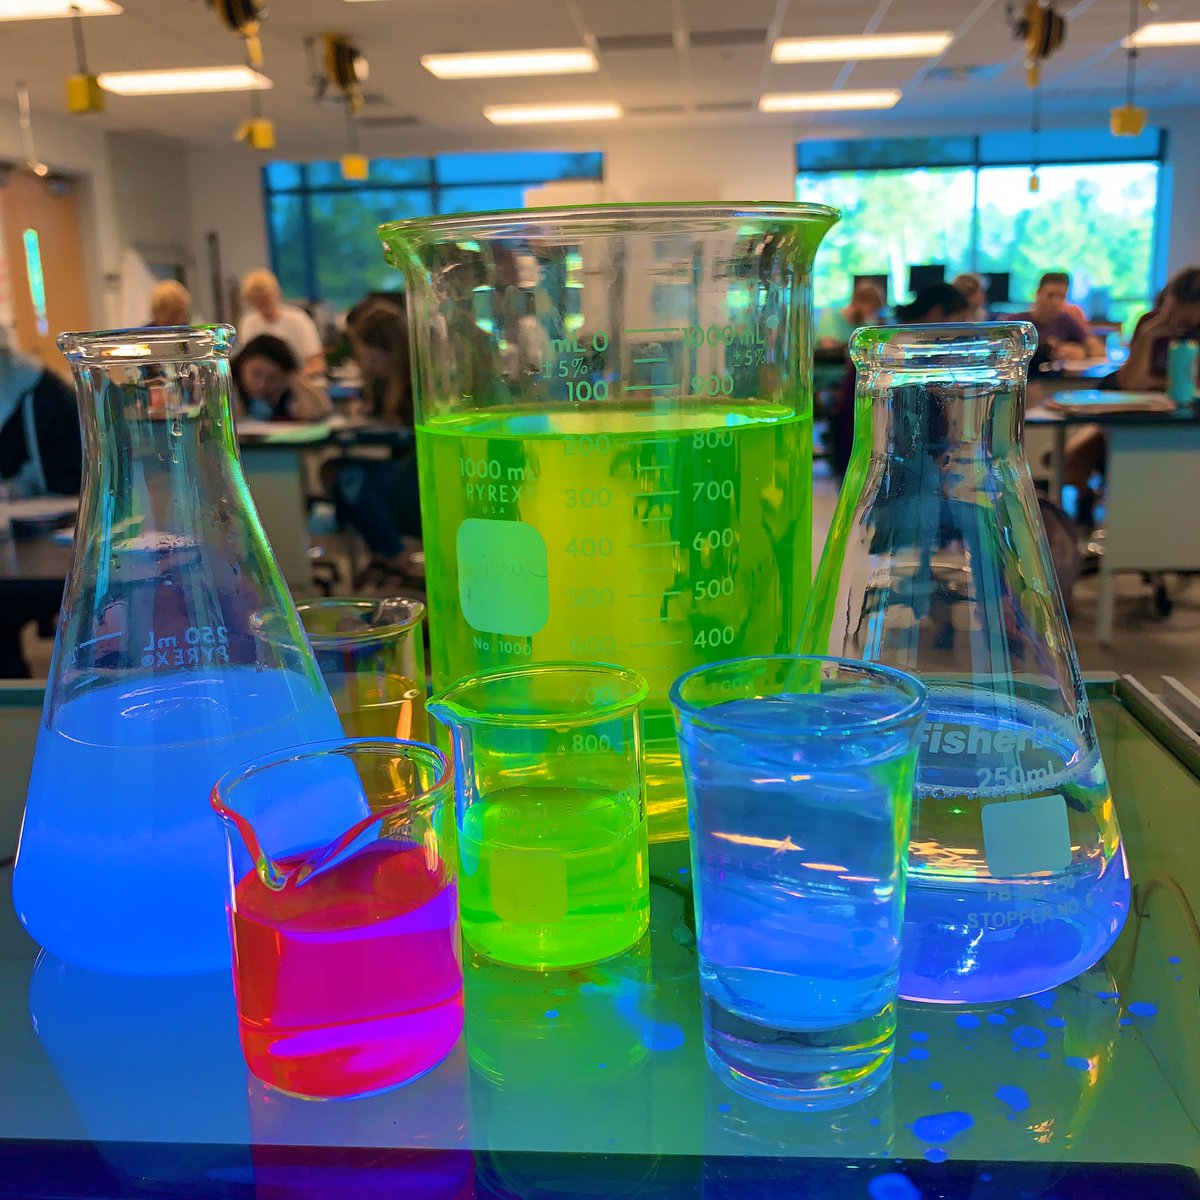 Chemistry is aglow for #fluorescencefriday 🧪⚗️🔬 #chemistryiscool #youlightupmylife #dowhatyoulove #becurious @FSWCollege